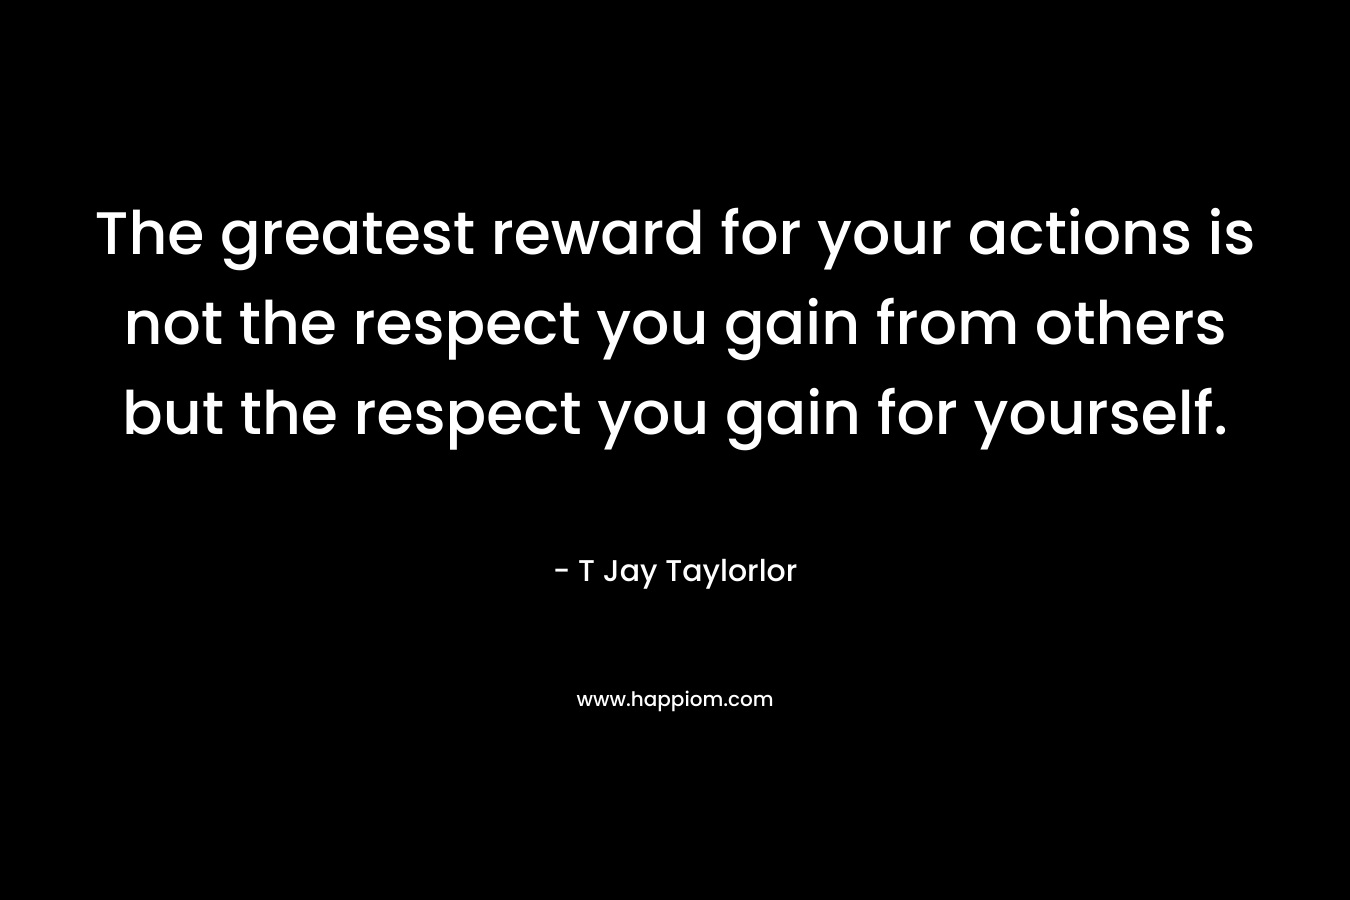 The greatest reward for your actions is not the respect you gain from others but the respect you gain for yourself.